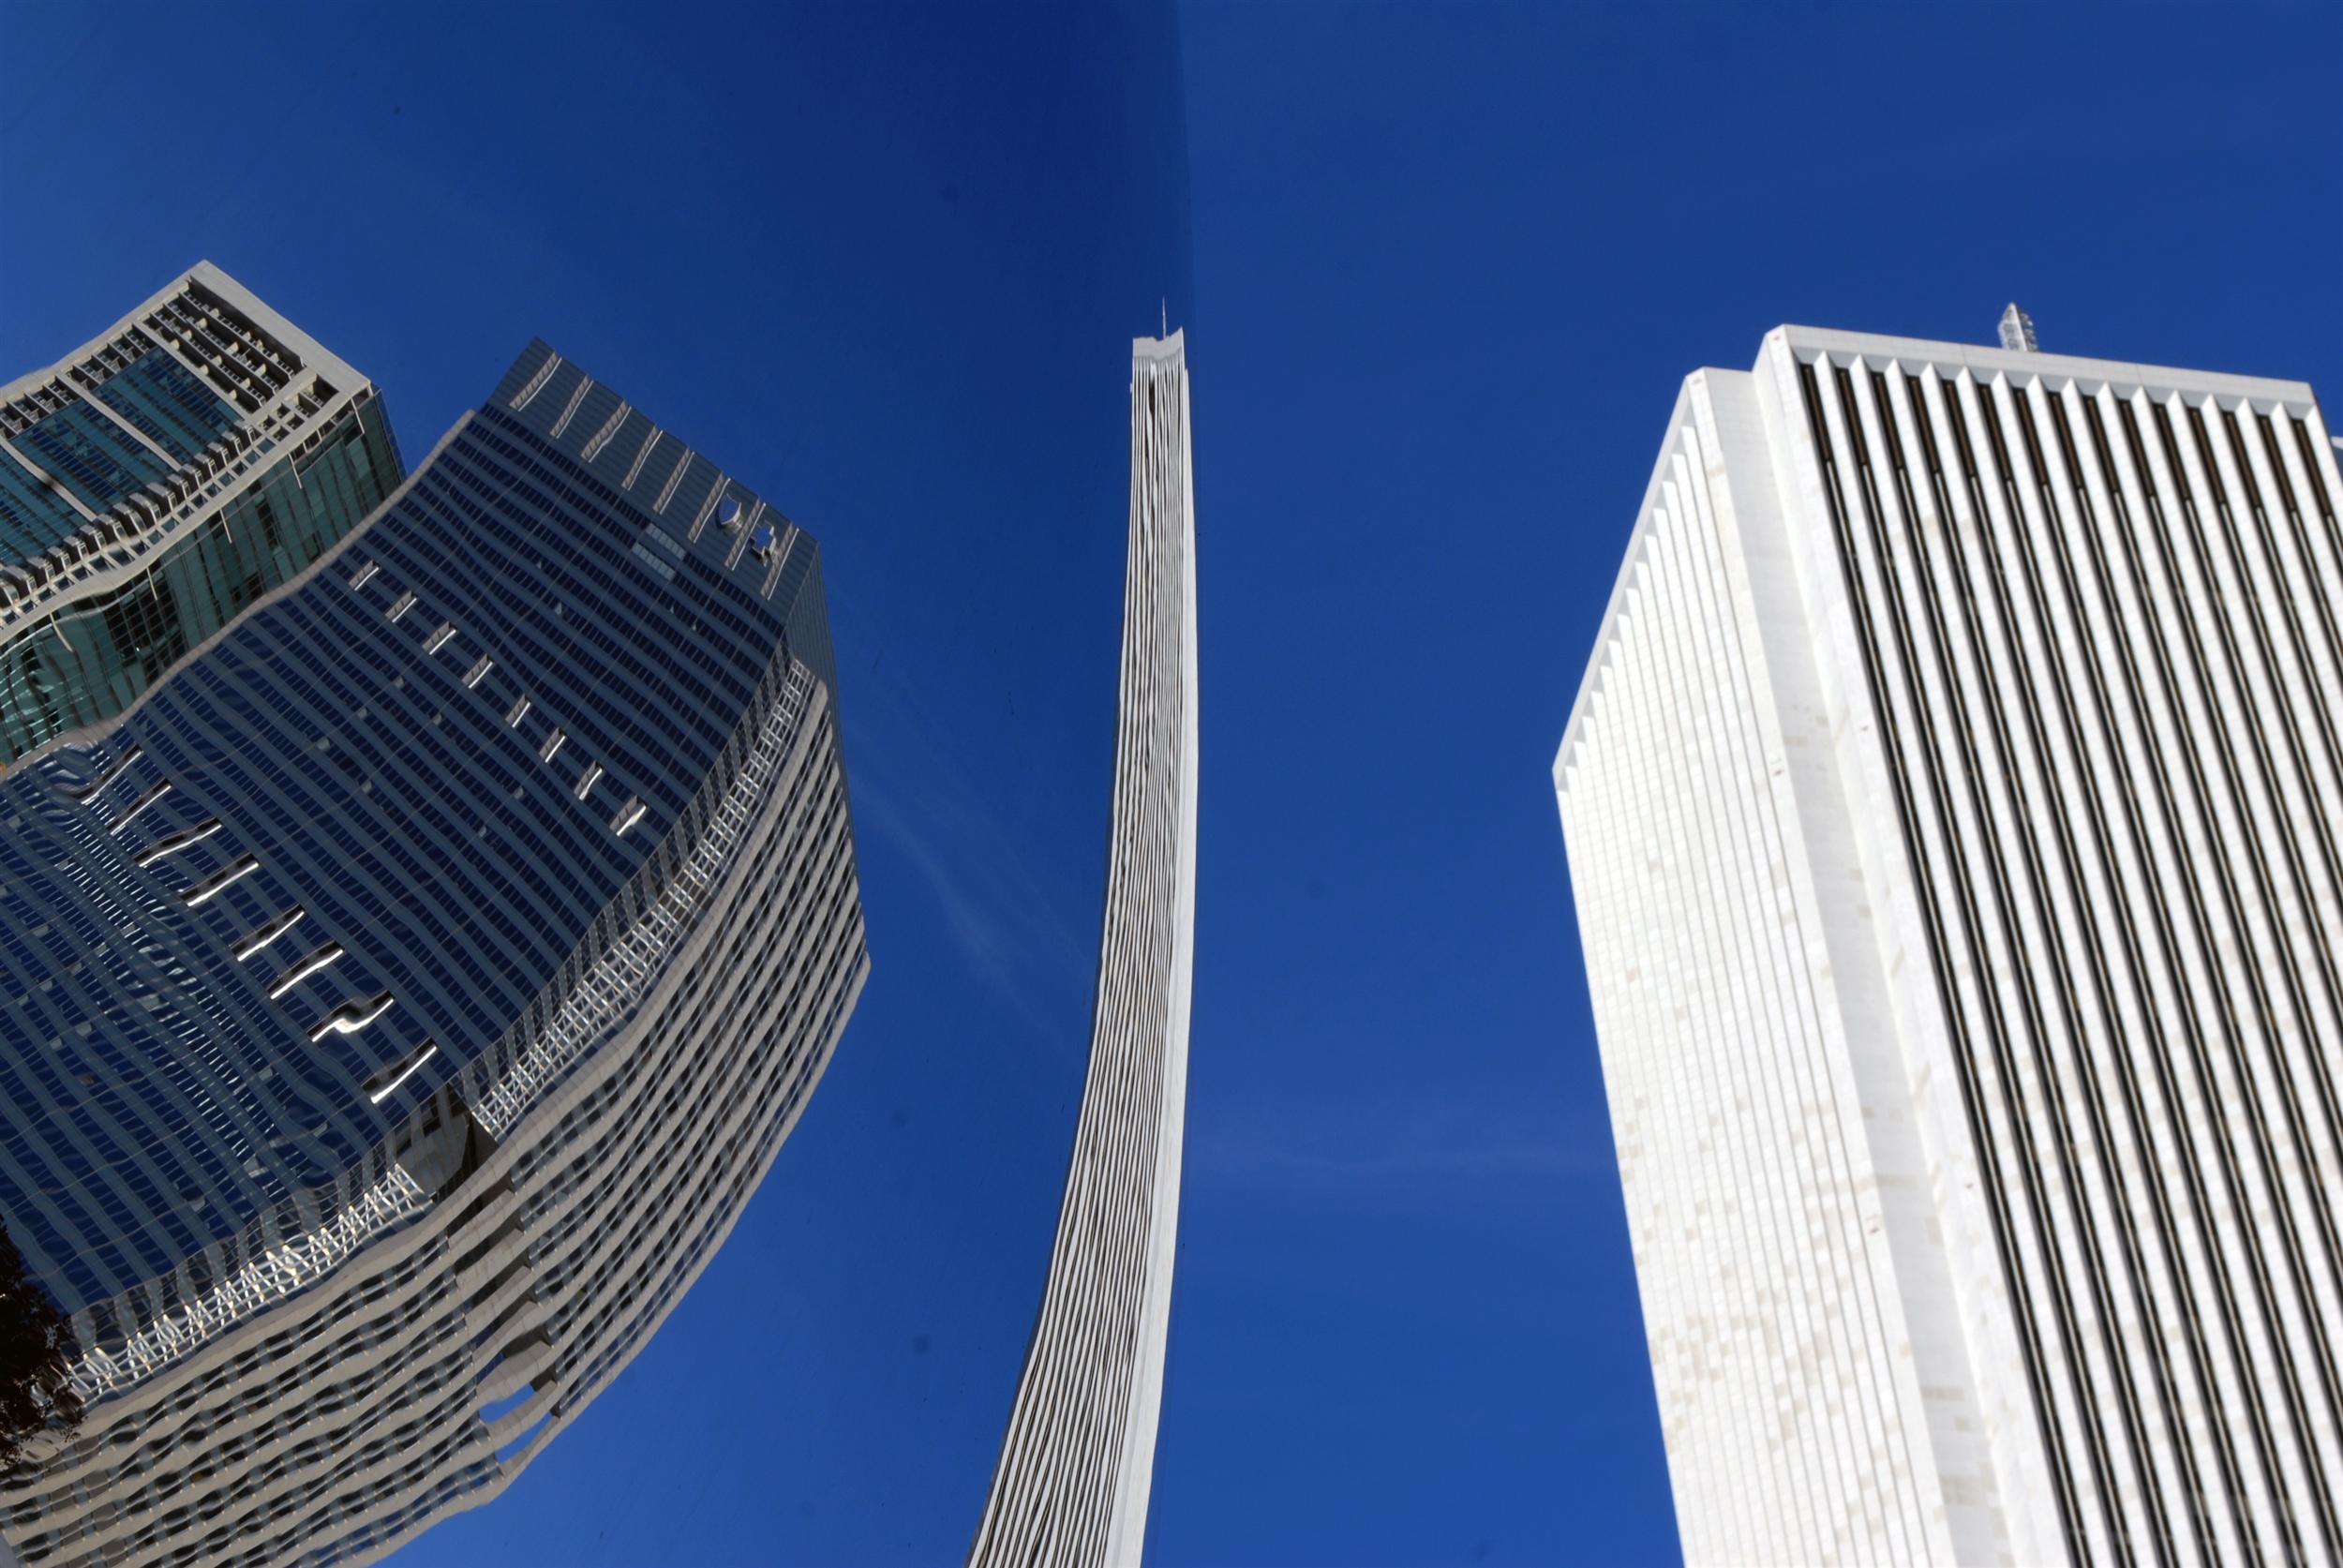 This Photographer’s Shots Of Real Buildings Look Just Like Optical Illusions